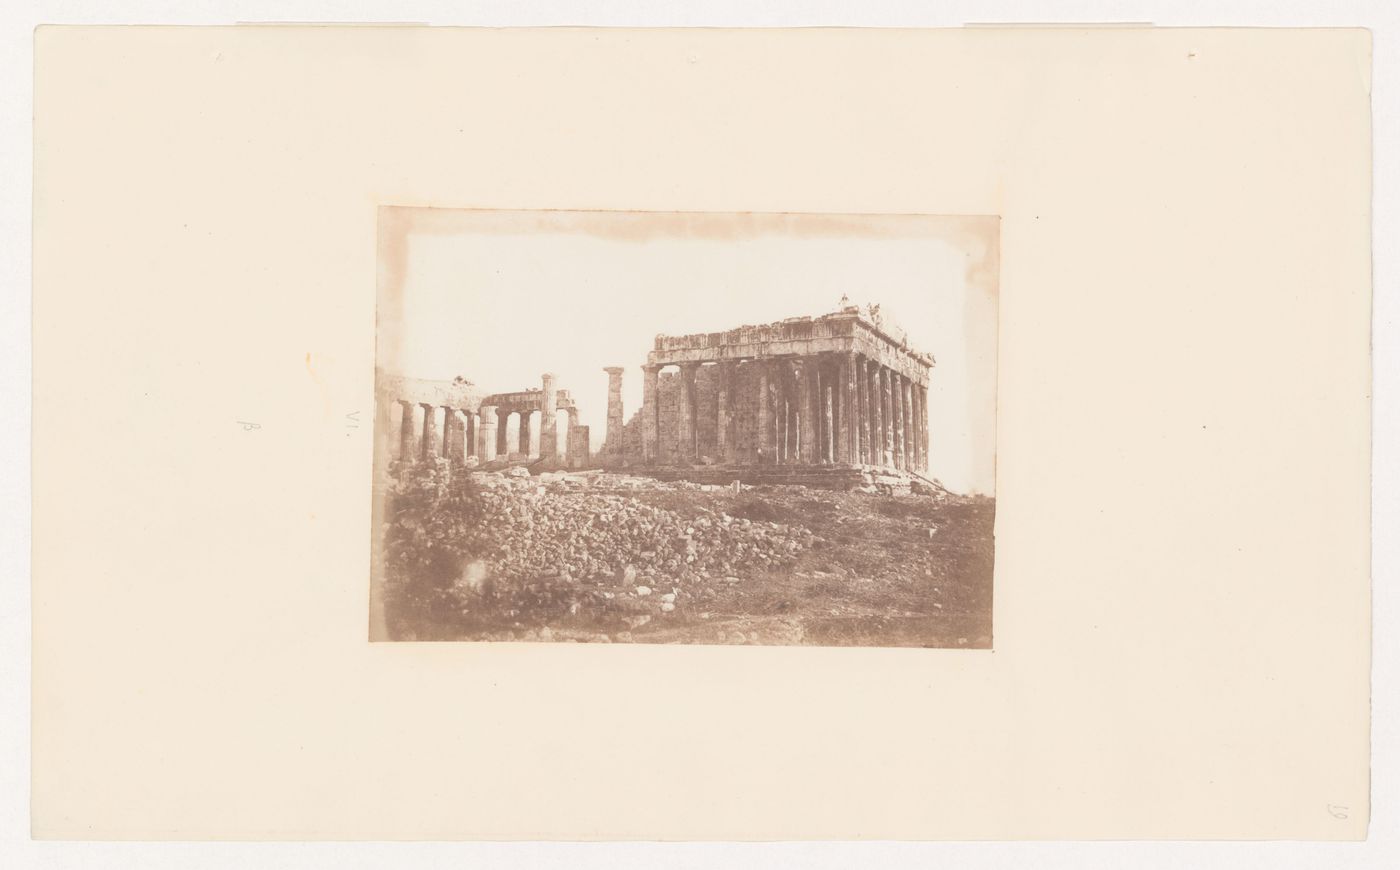 The Parthenon - northern side